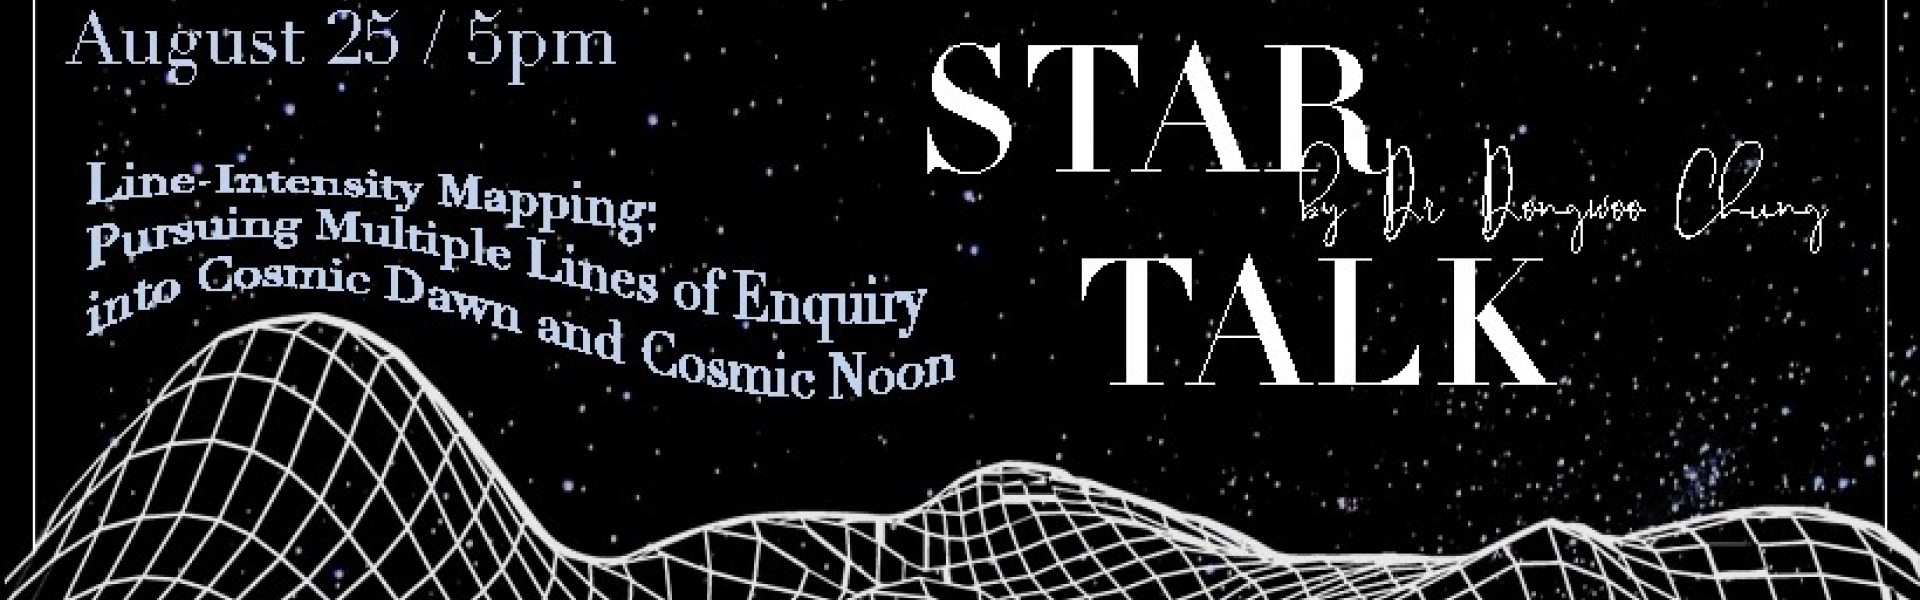 ASX Star Talk: Pursuing multiple lines of enquiry into cosmic dawn and cosmic noon